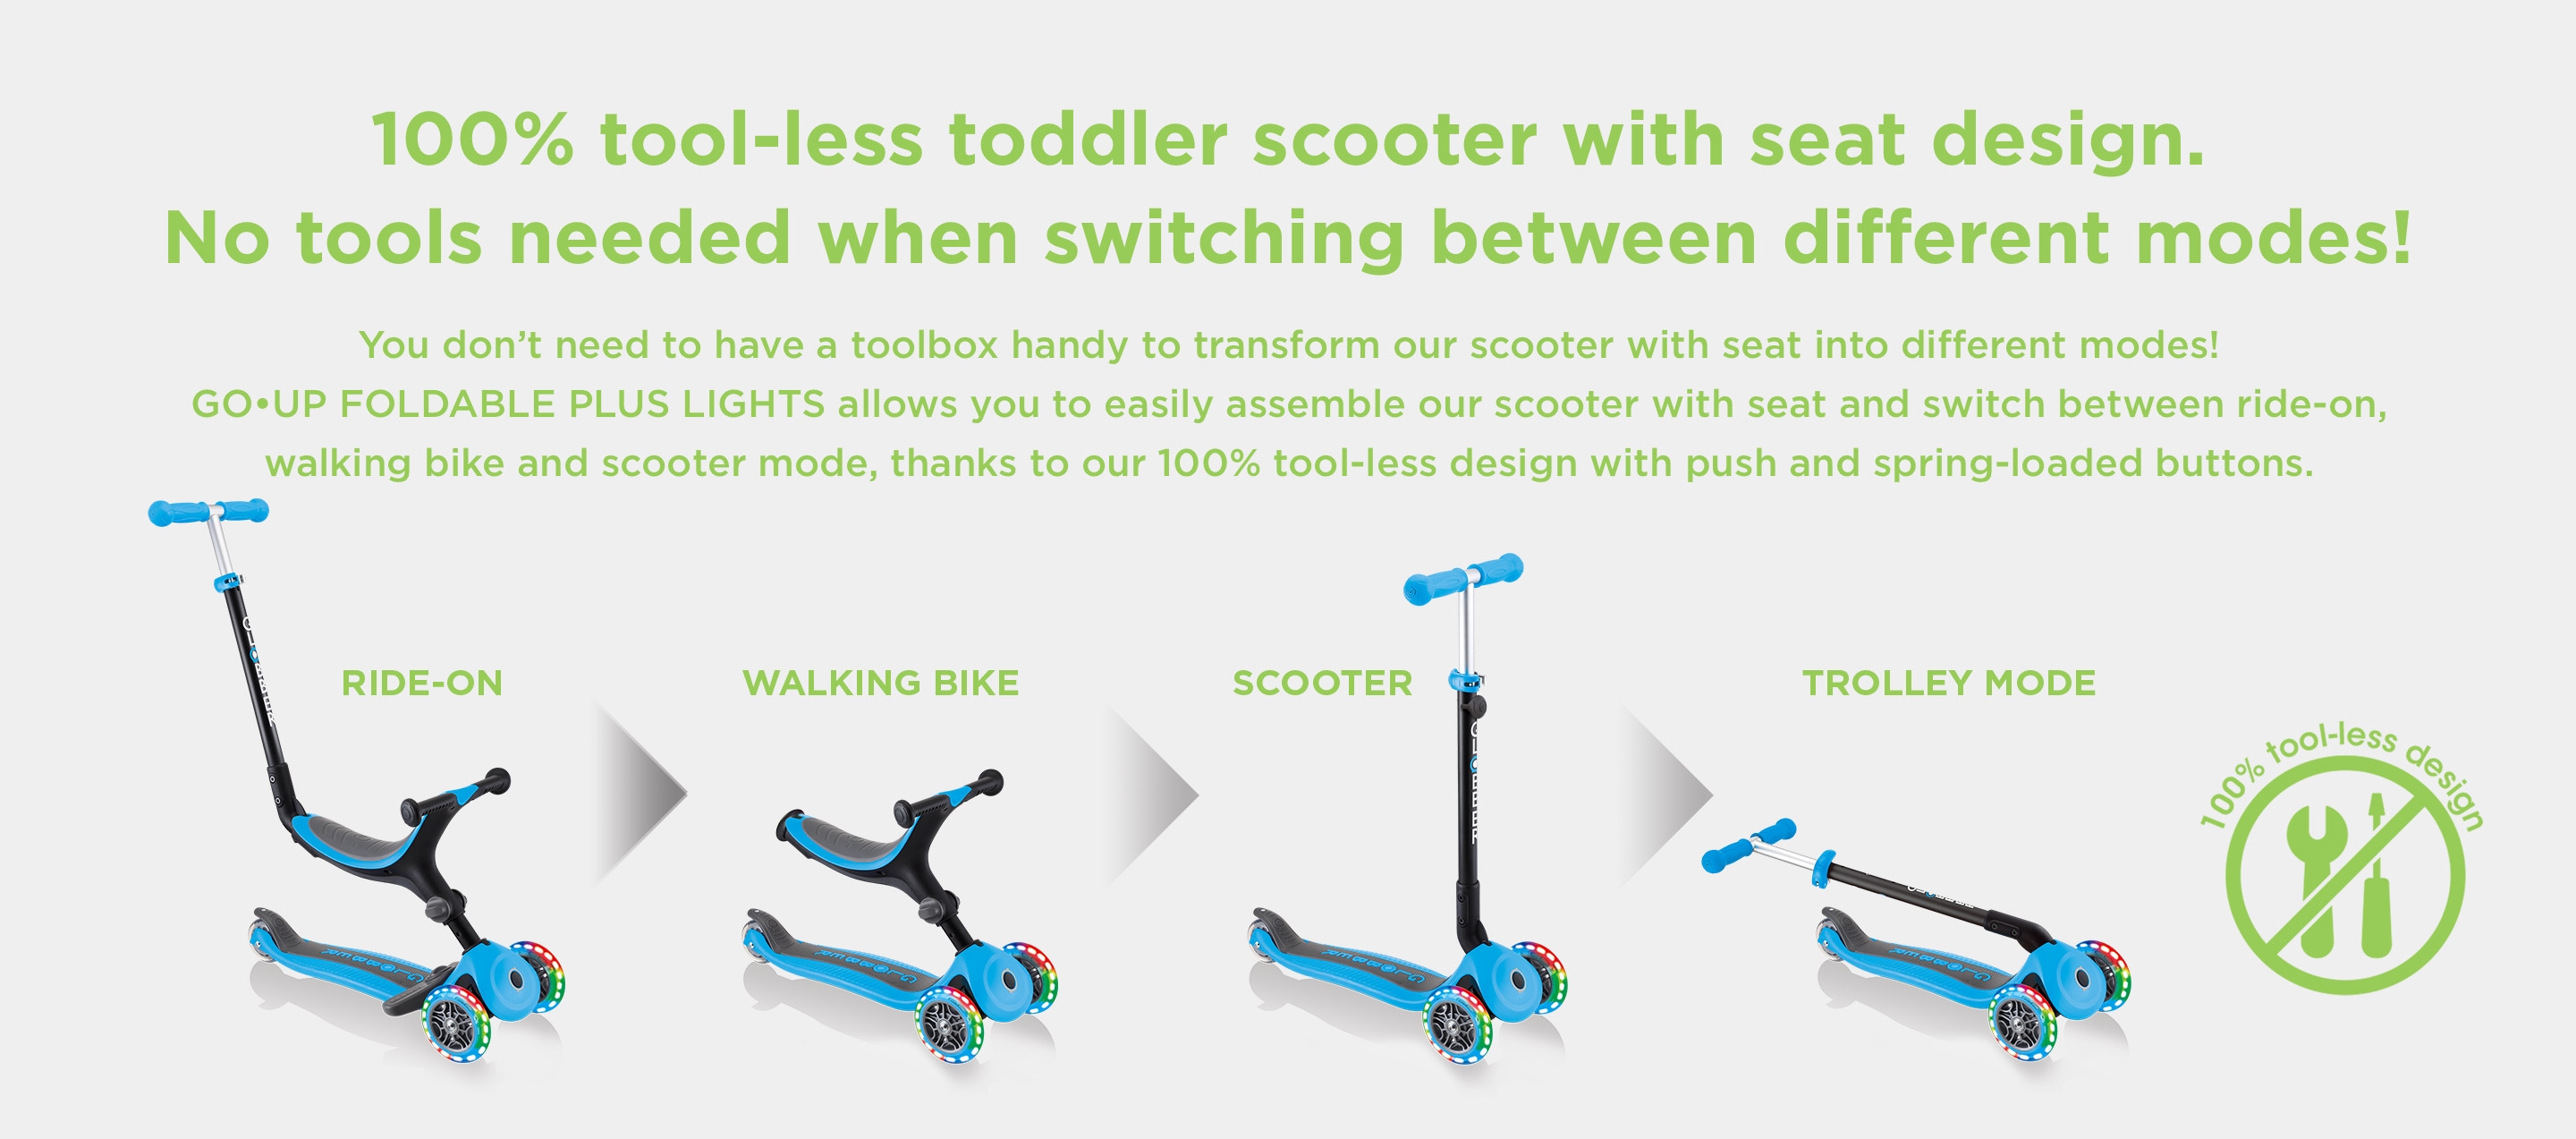 No screws needed when switching between riding modes on the light up scooter for toddlers